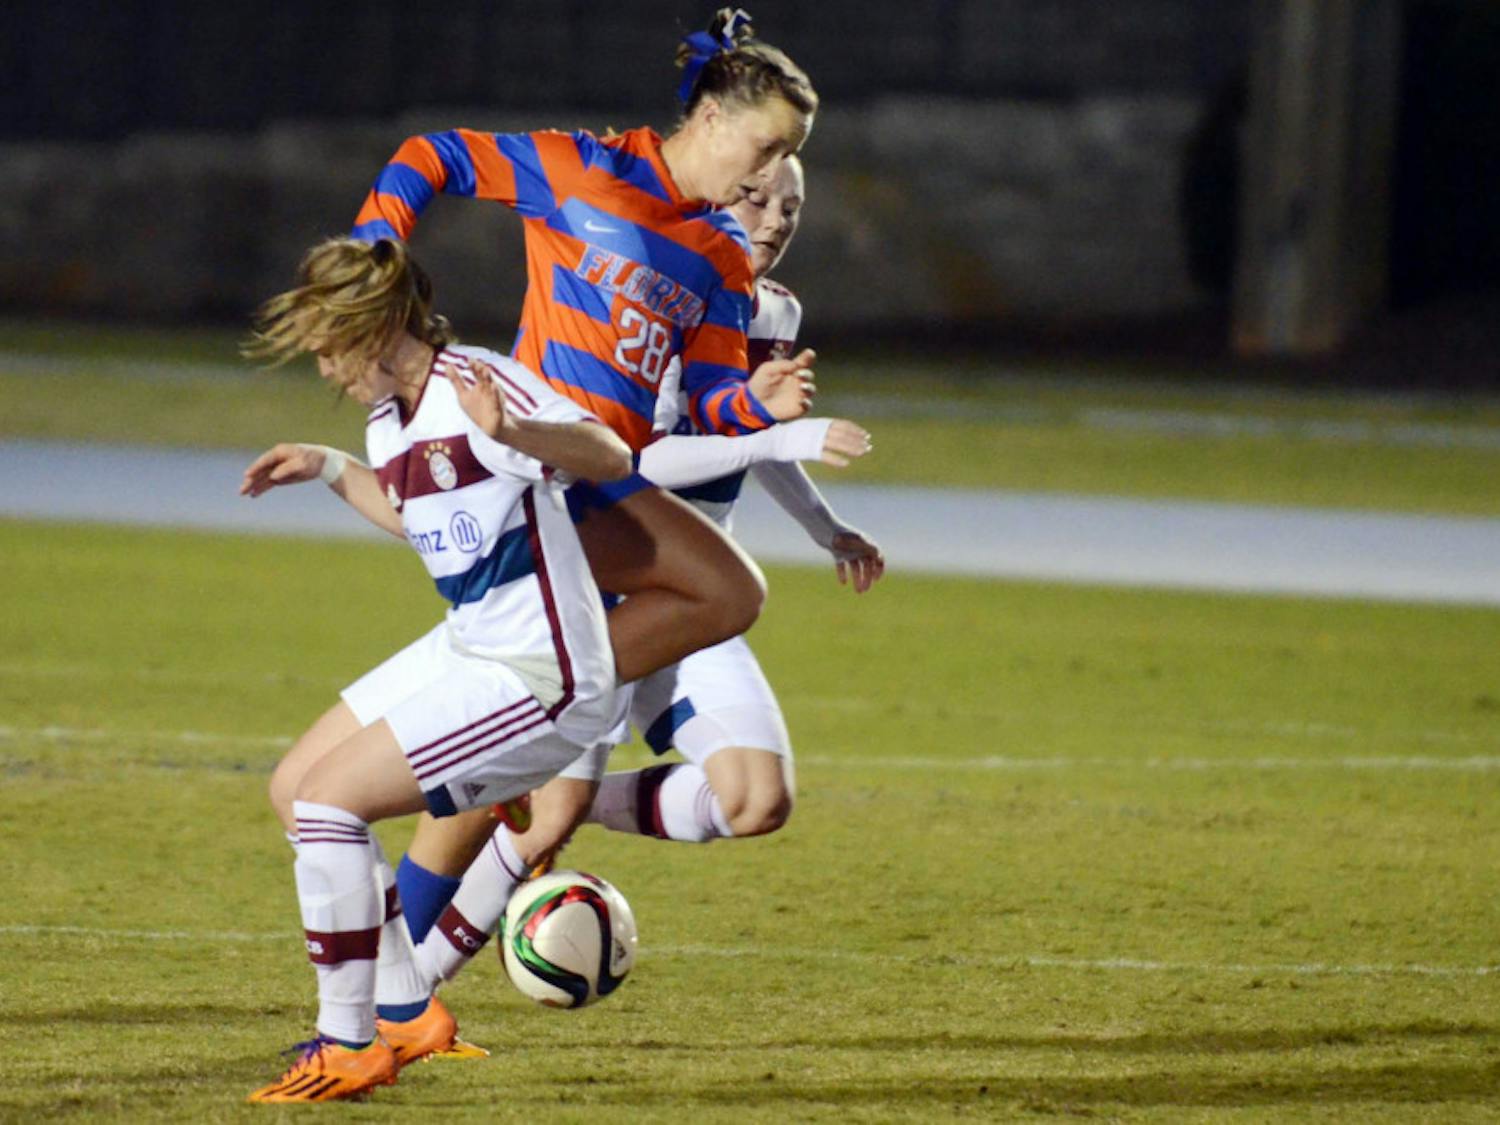 UF midfielder Meggie Dougherty-Howard dribbles during Florida's 4-0 loss to FC Bayern Munich on Saturday at James G. Pressly Stadium.